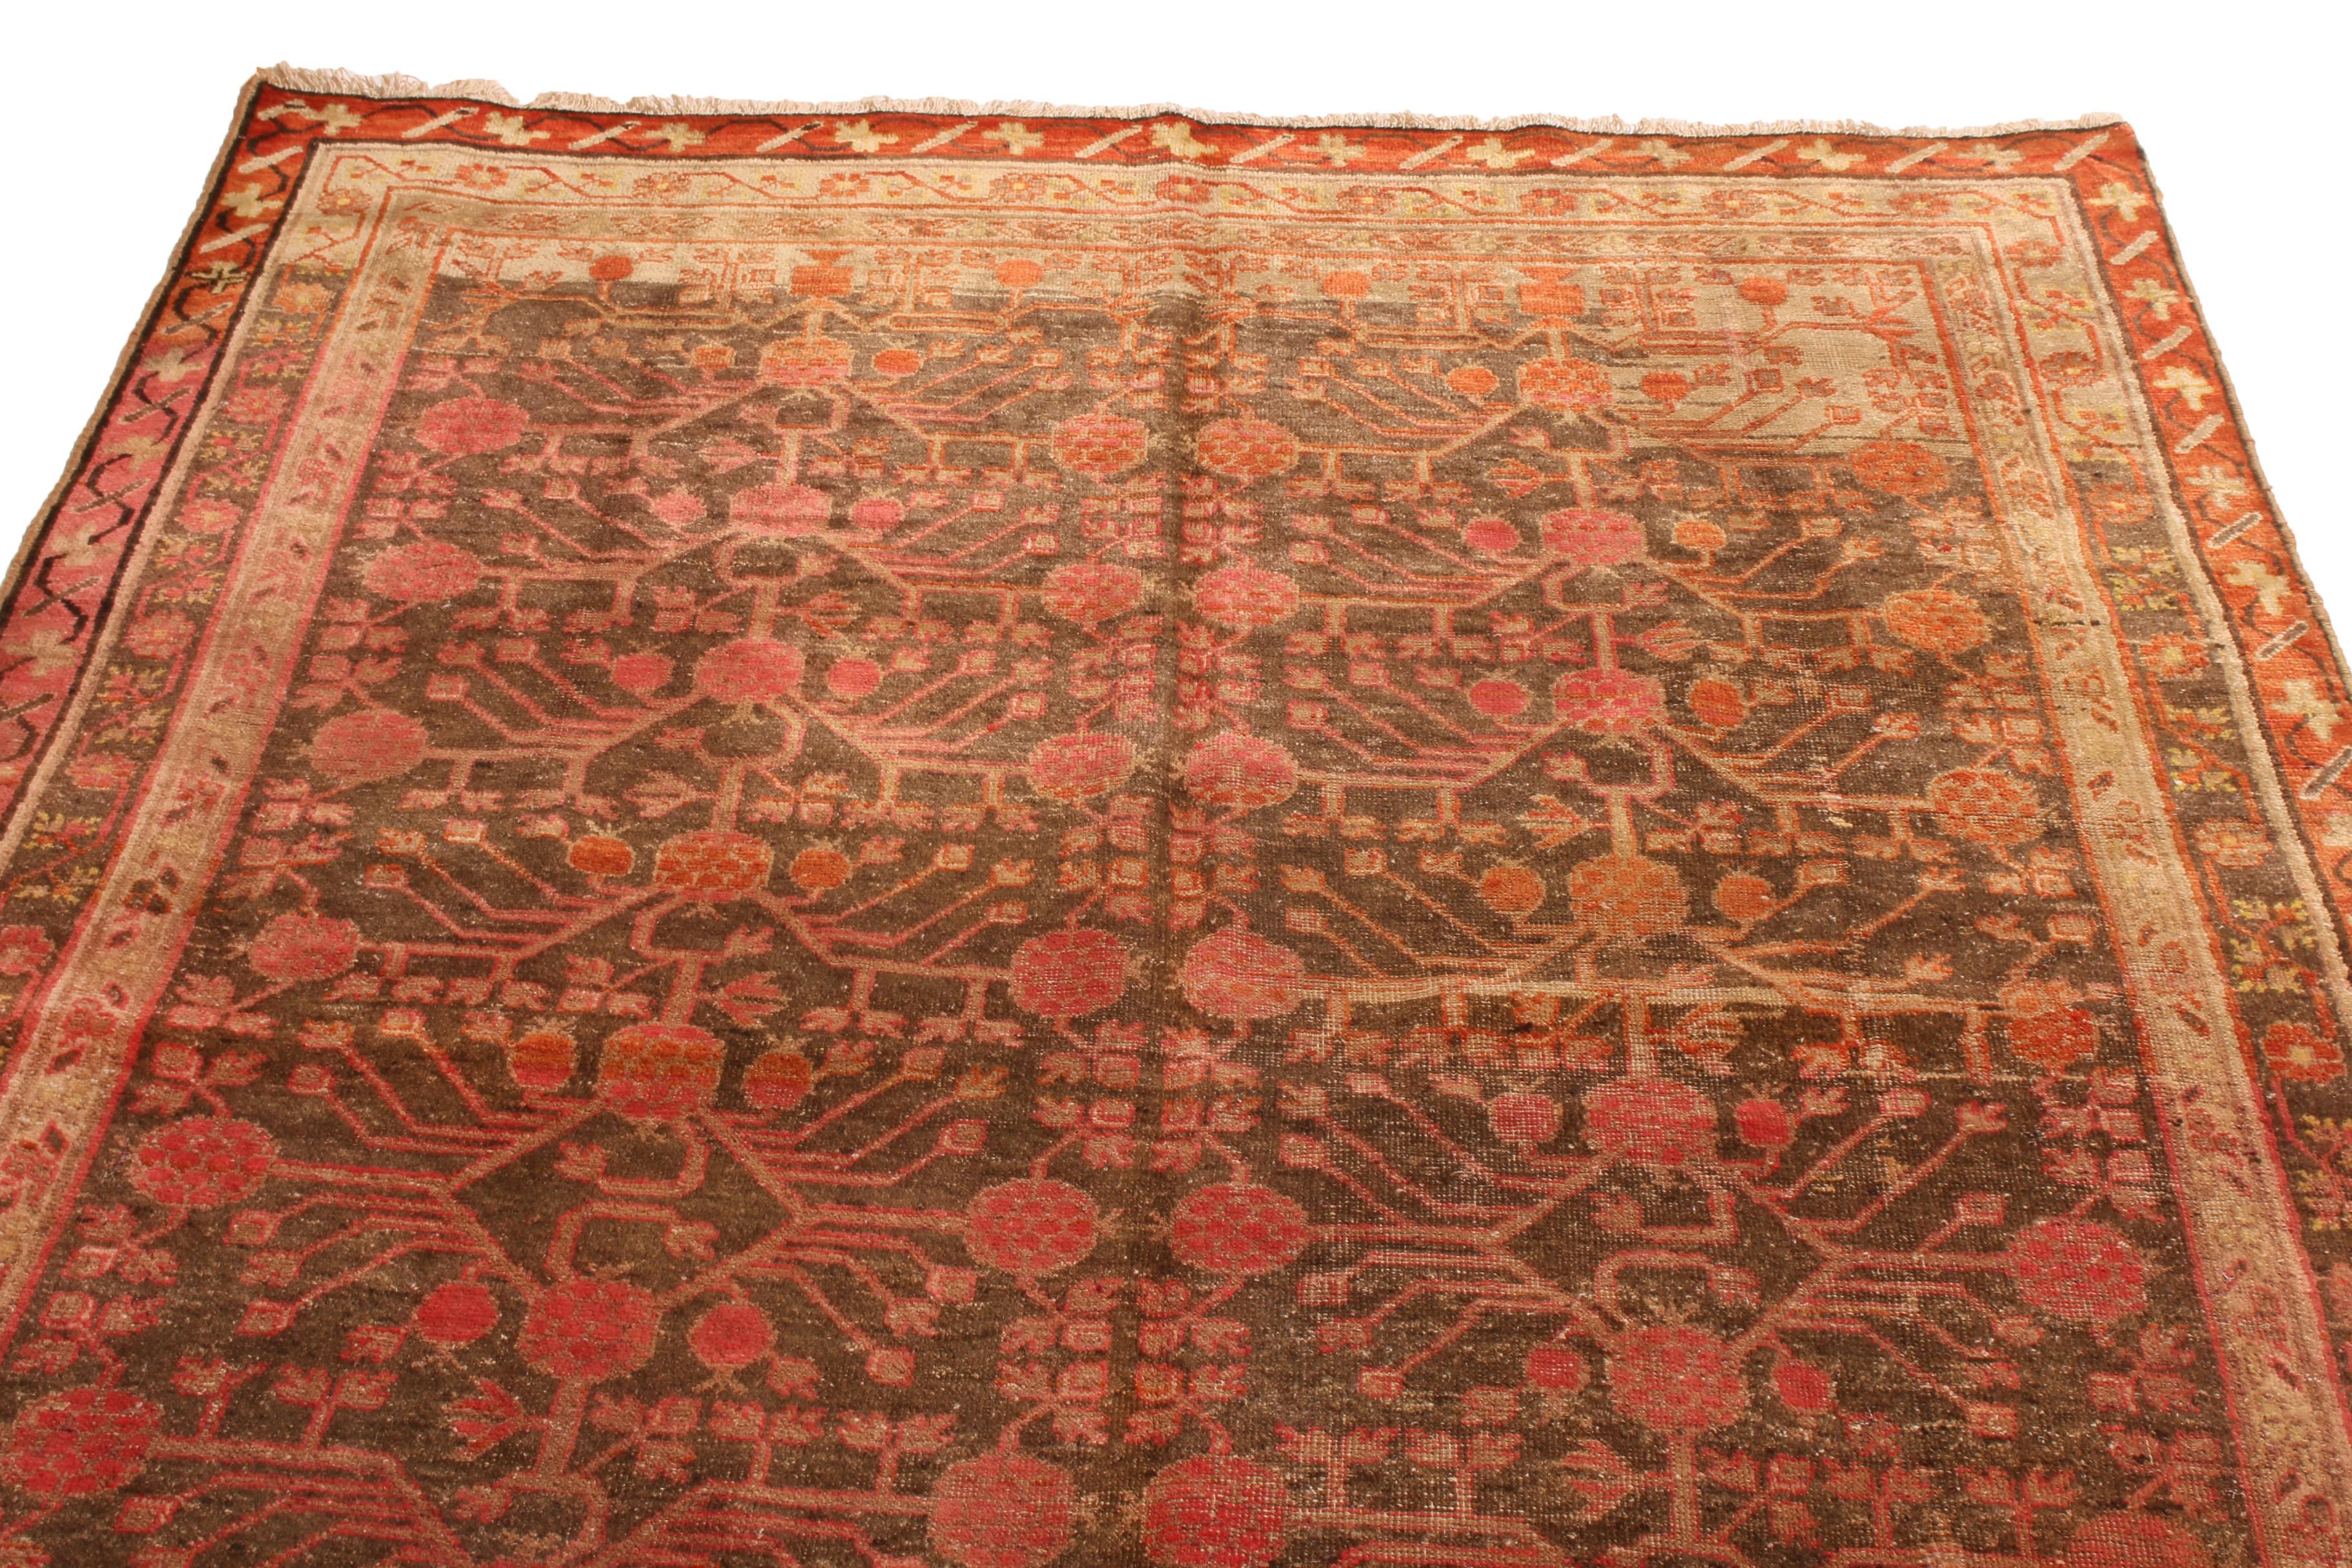 Originating from East Turkestan in 1920, this antique transitional Khotan rug from Rug & Kilim marries distinguished regional symbolism with a unique color orientation. ¬Hand woven in high quality wool, the field design depicts rich, finely woven